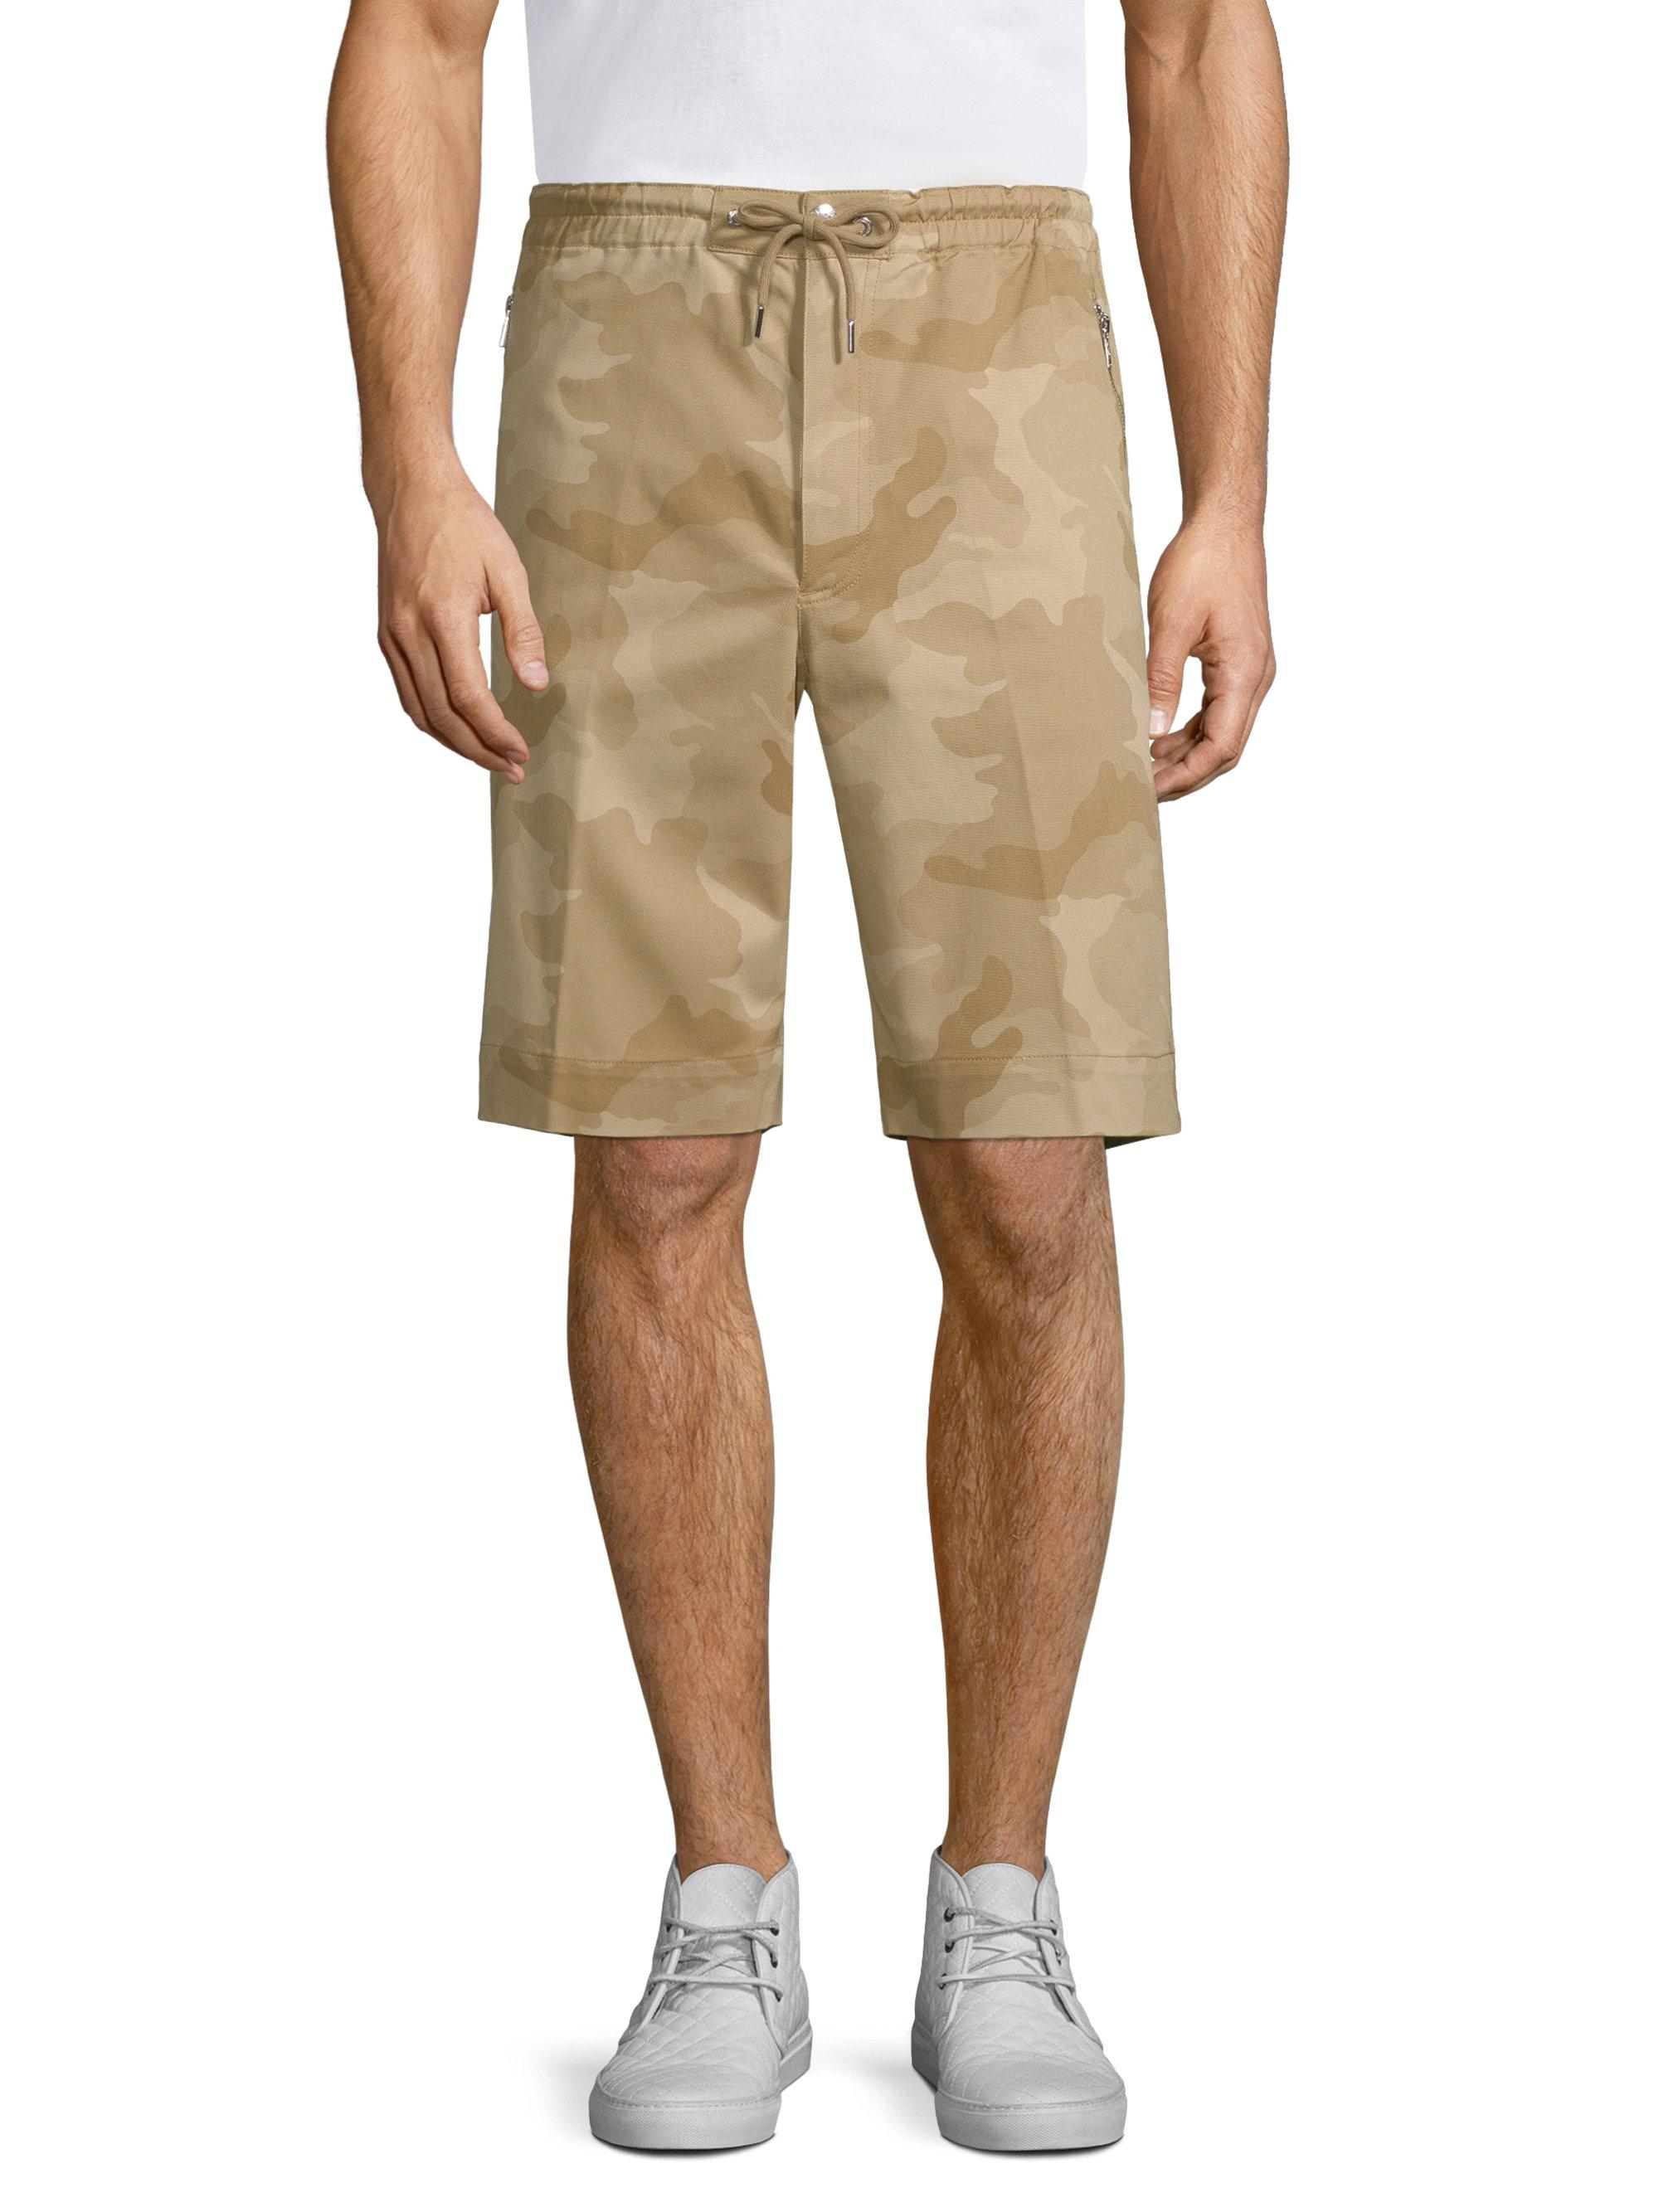 Moncler Cotton Camouflage Bermuda Shorts in Camel (Natural) for Men - Lyst